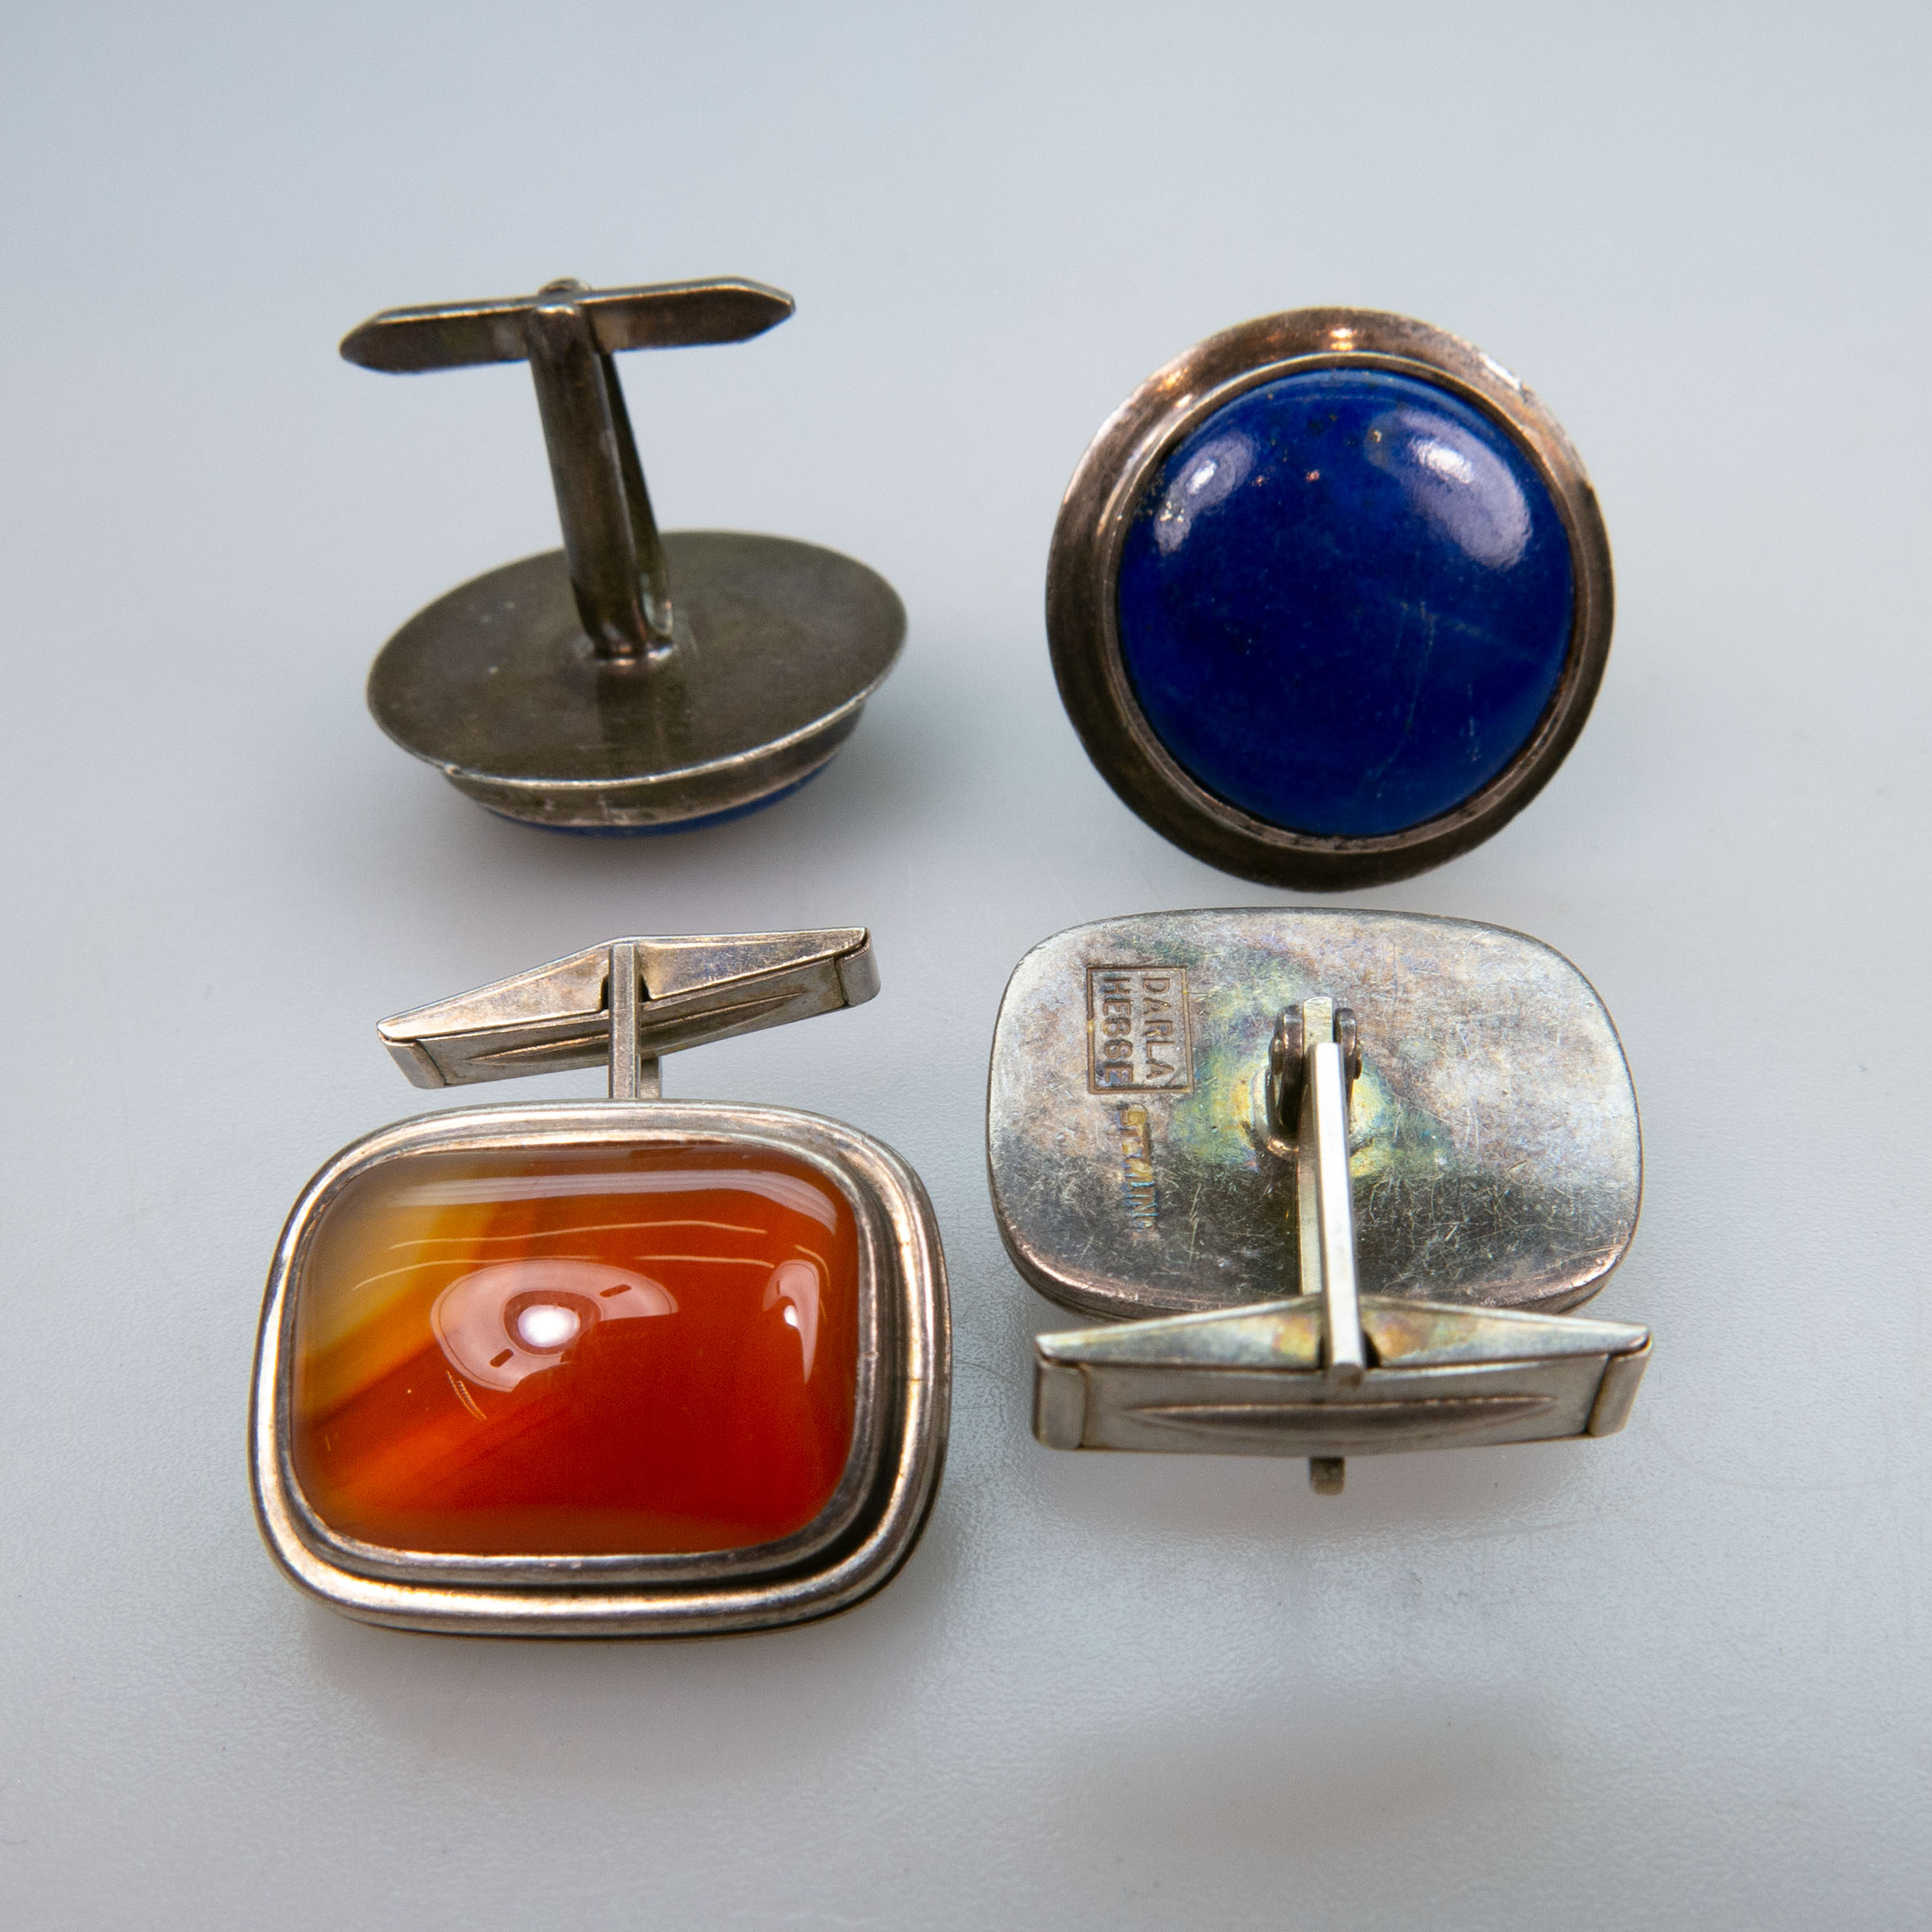 4 Pairs Of Sterling Silver Cufflinks